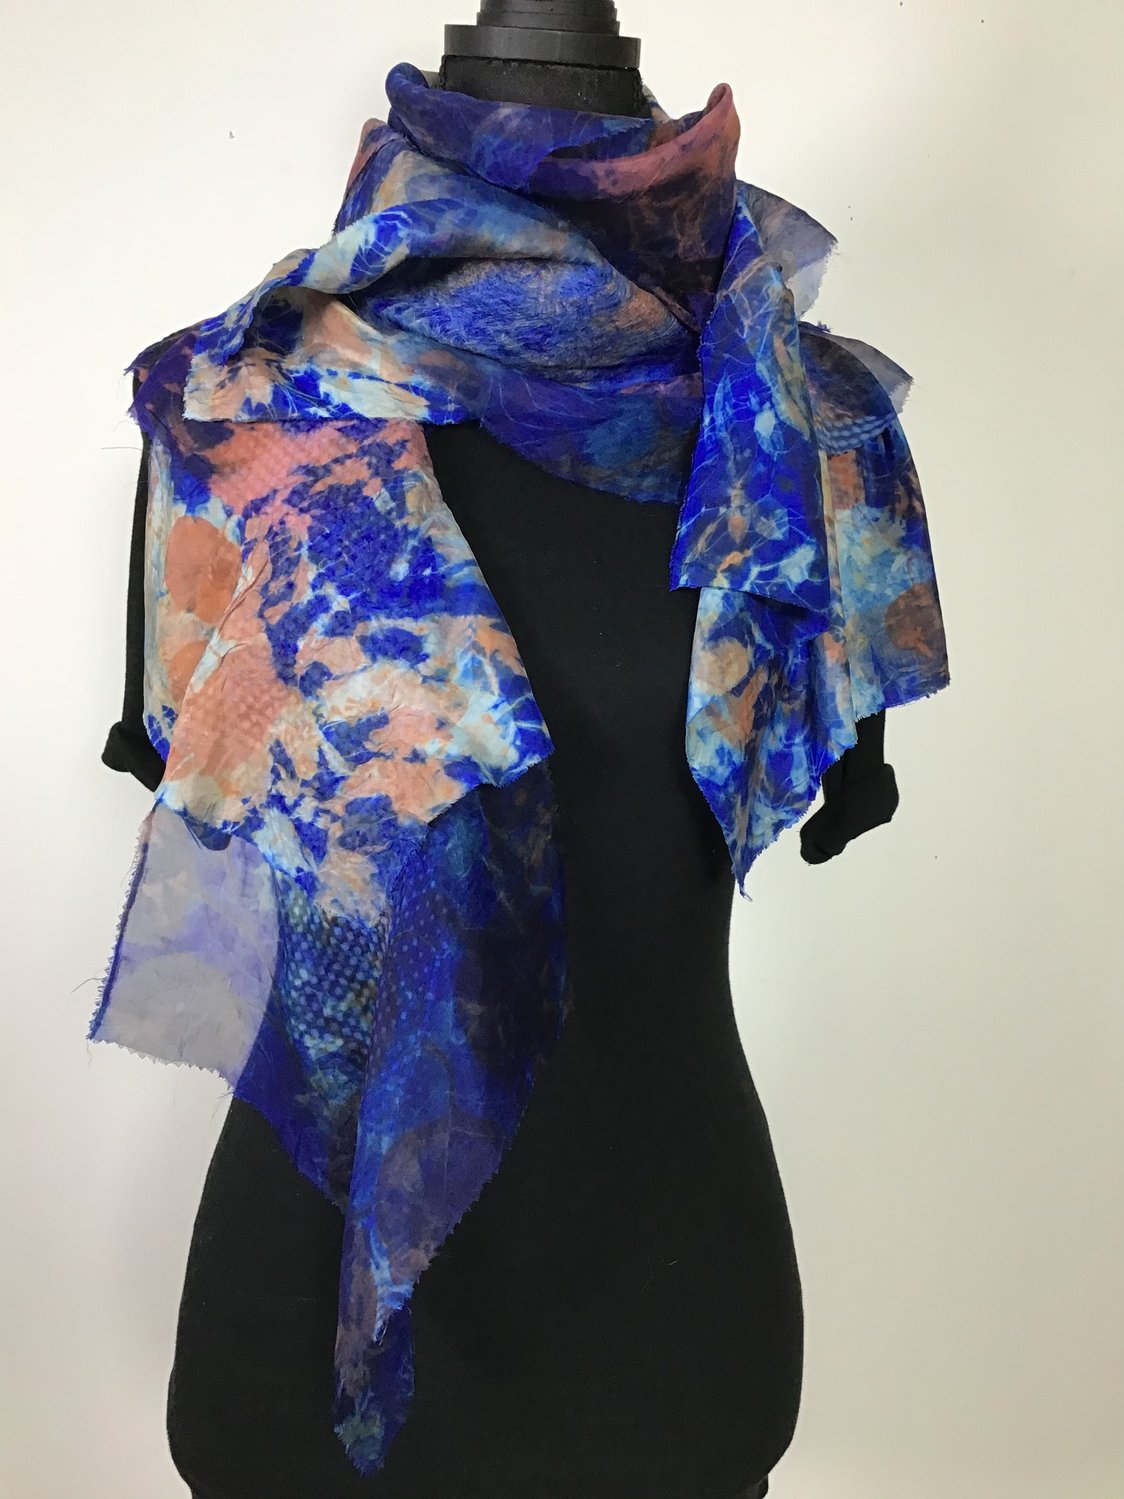 A hand-dyed flutter scarf by Amy Hemphill Dove